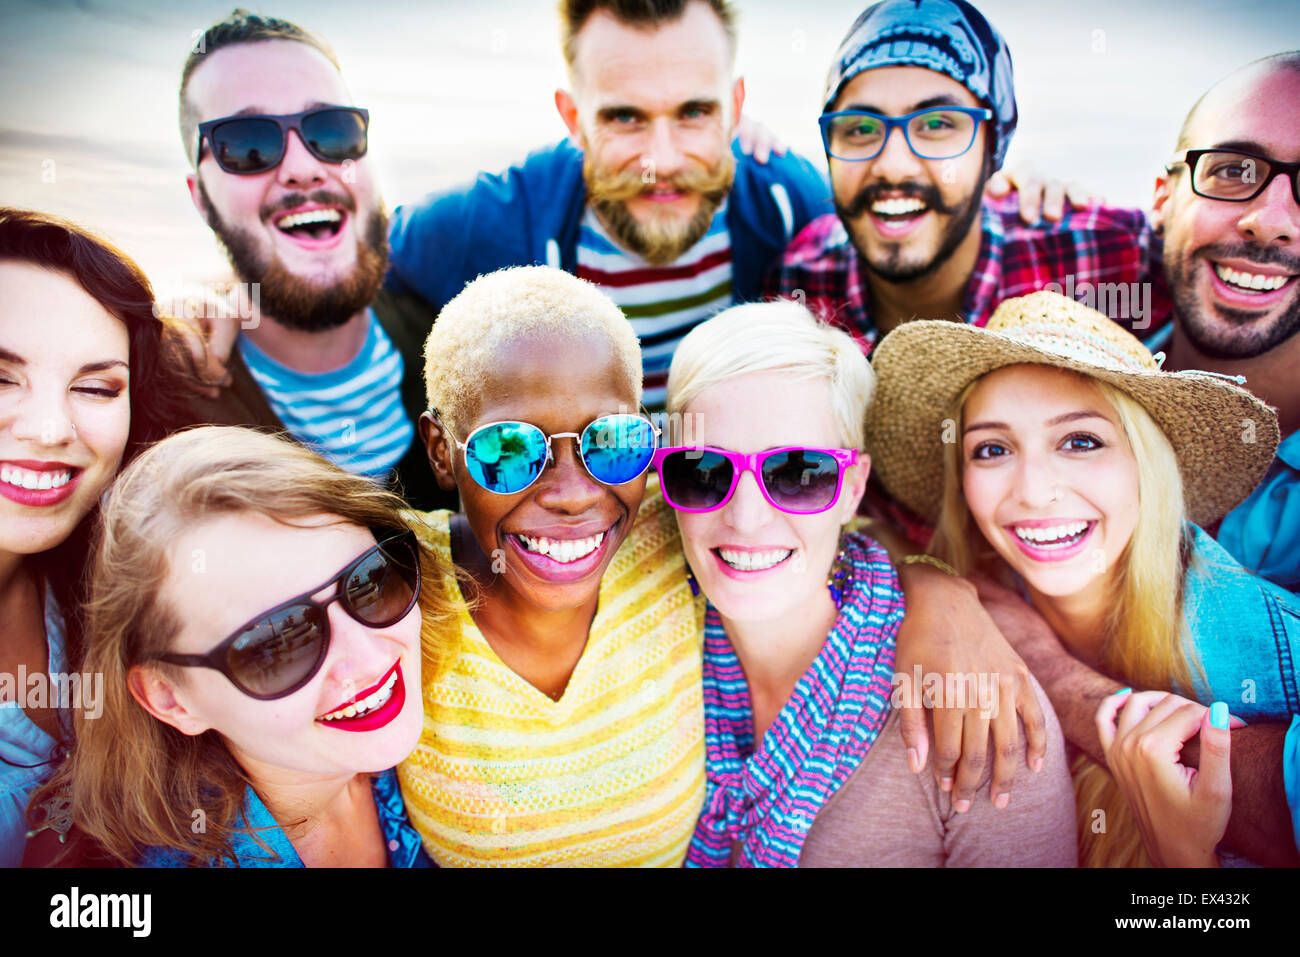 Friends Huddle Cheerful Union Summer Concept Stock Photo